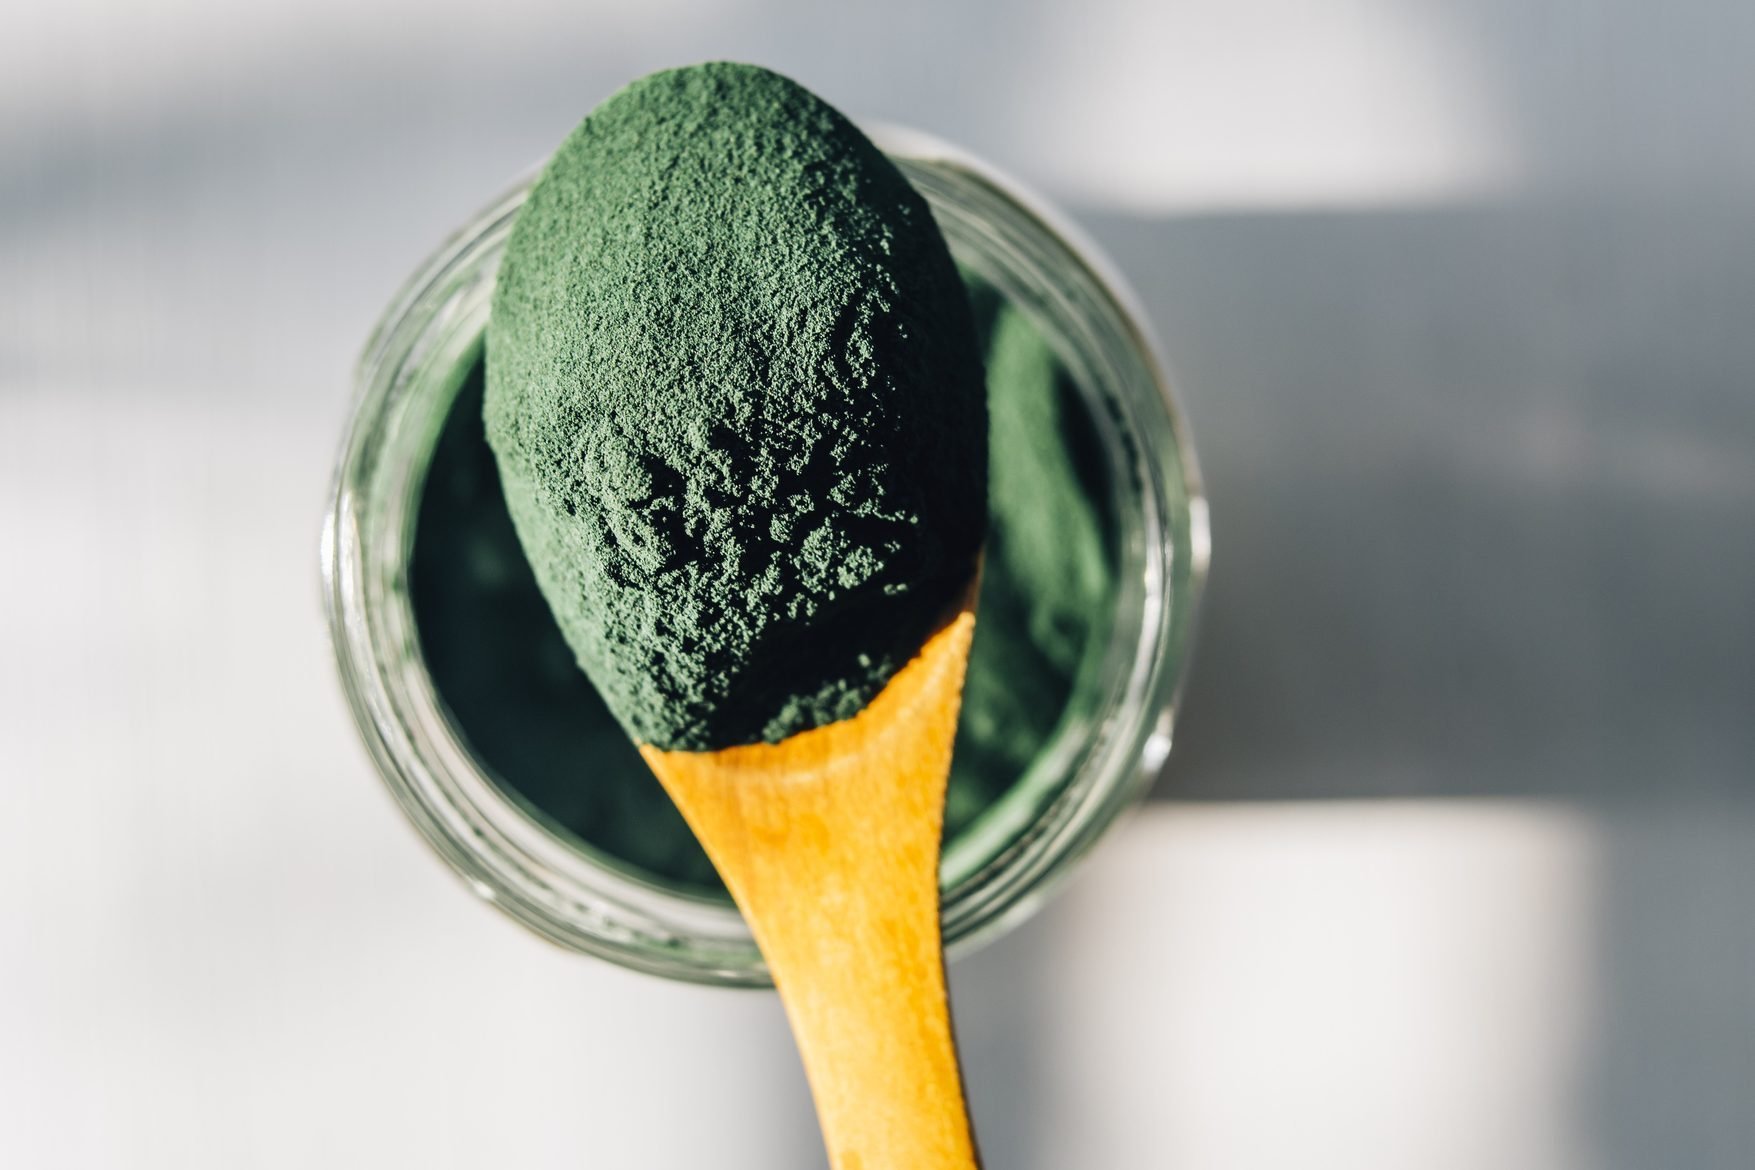 What You Should Know About Spirulina Benefits, Nutrition, and More